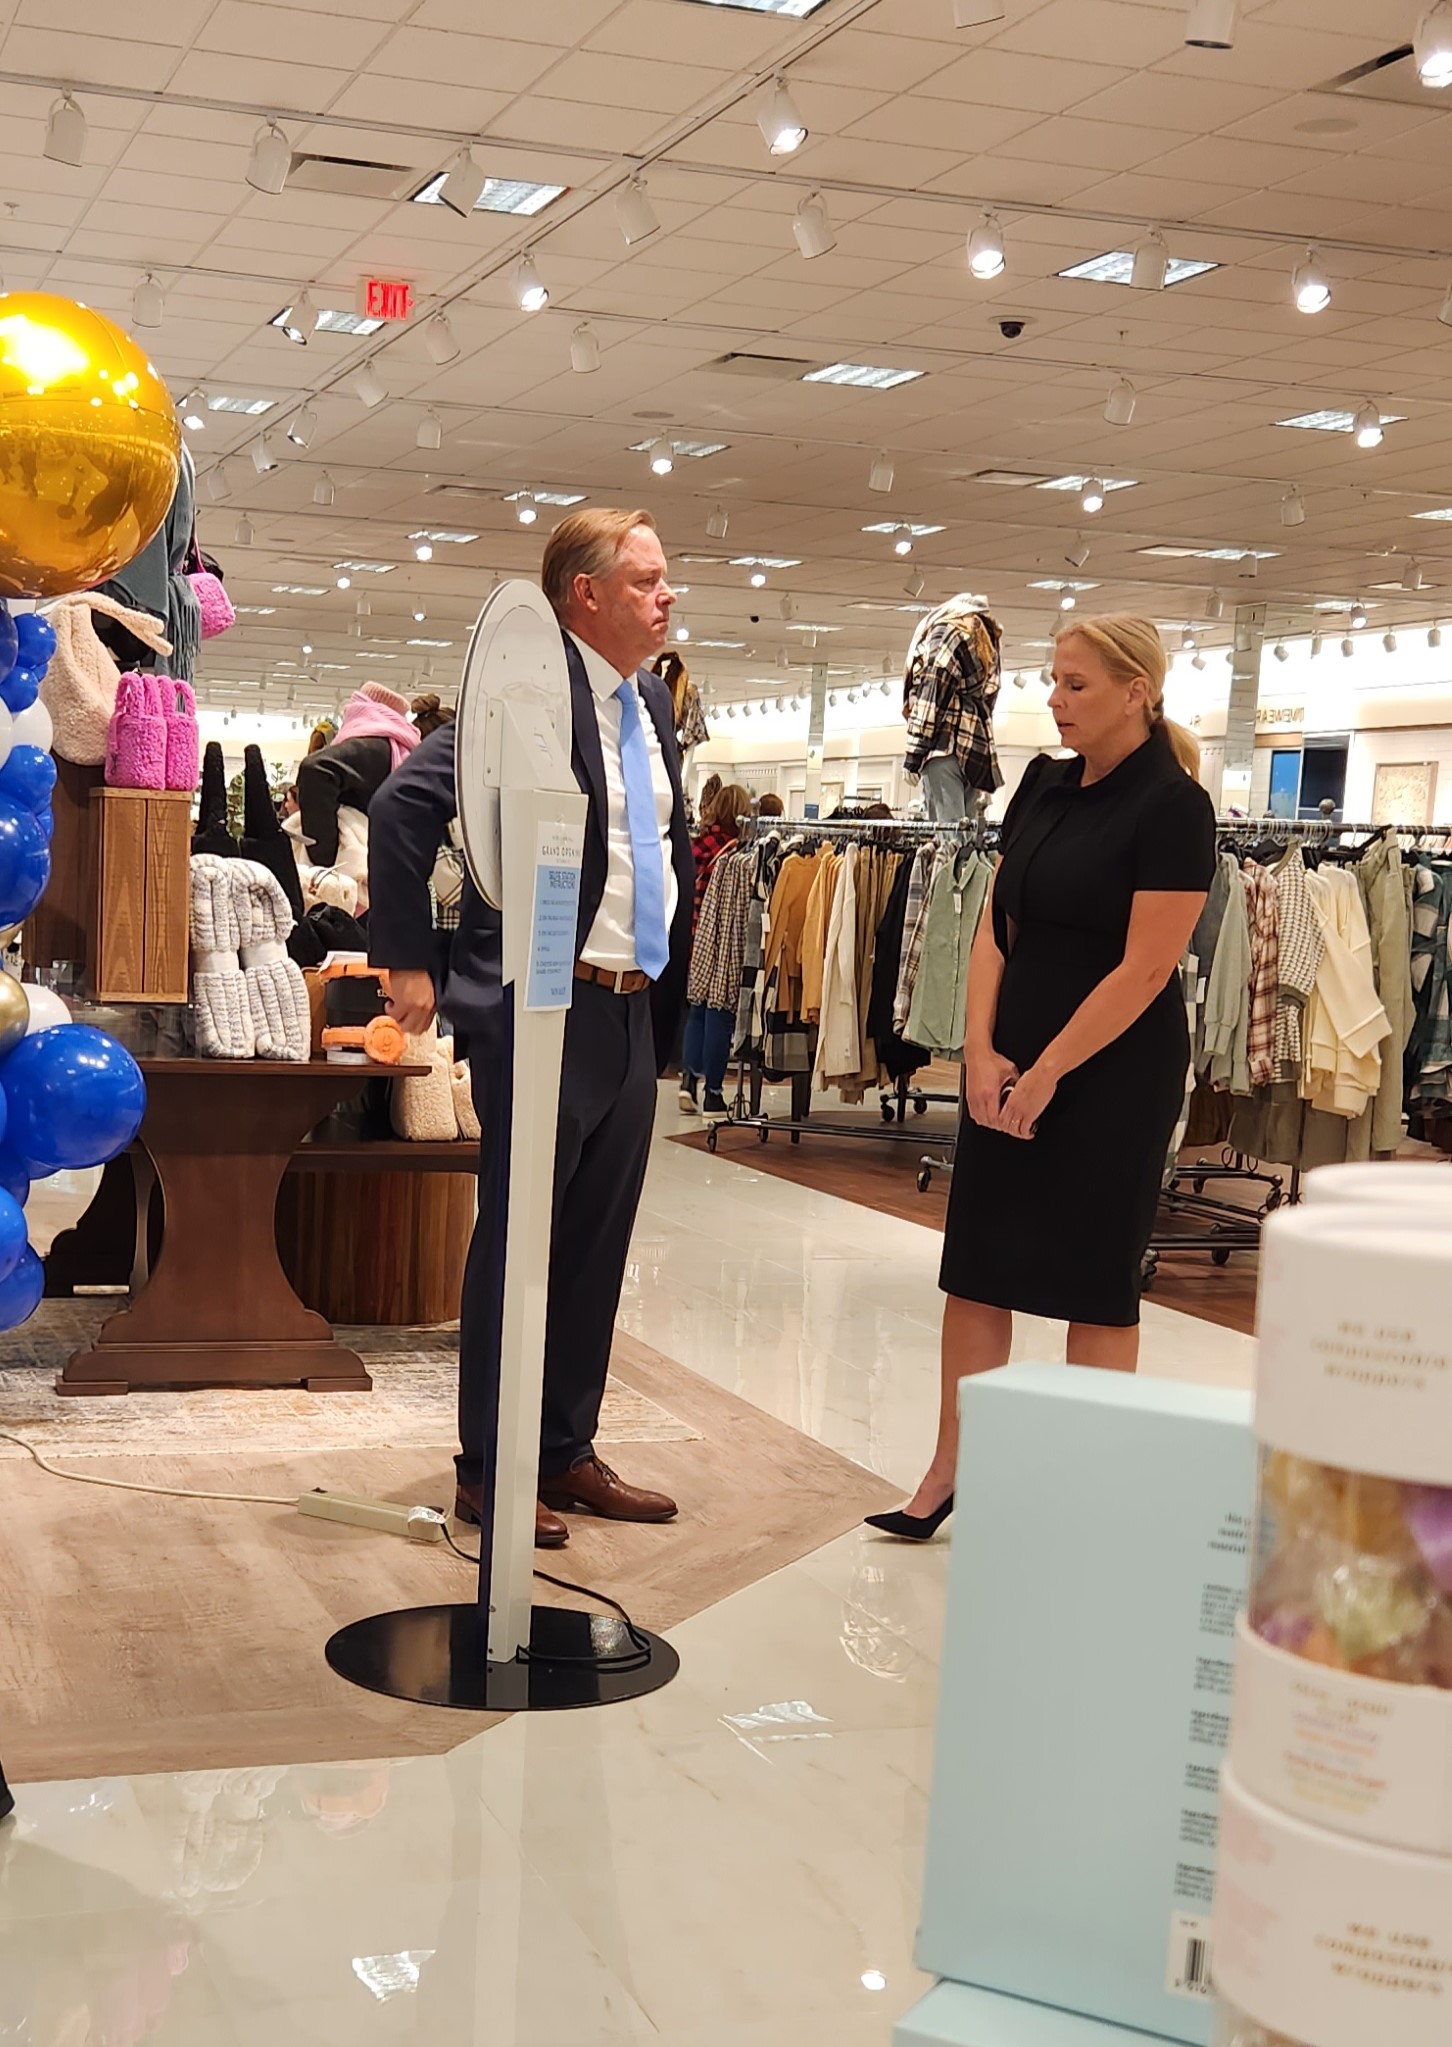 Photos: Take a look inside the new Von Maur store at West Towne Mall